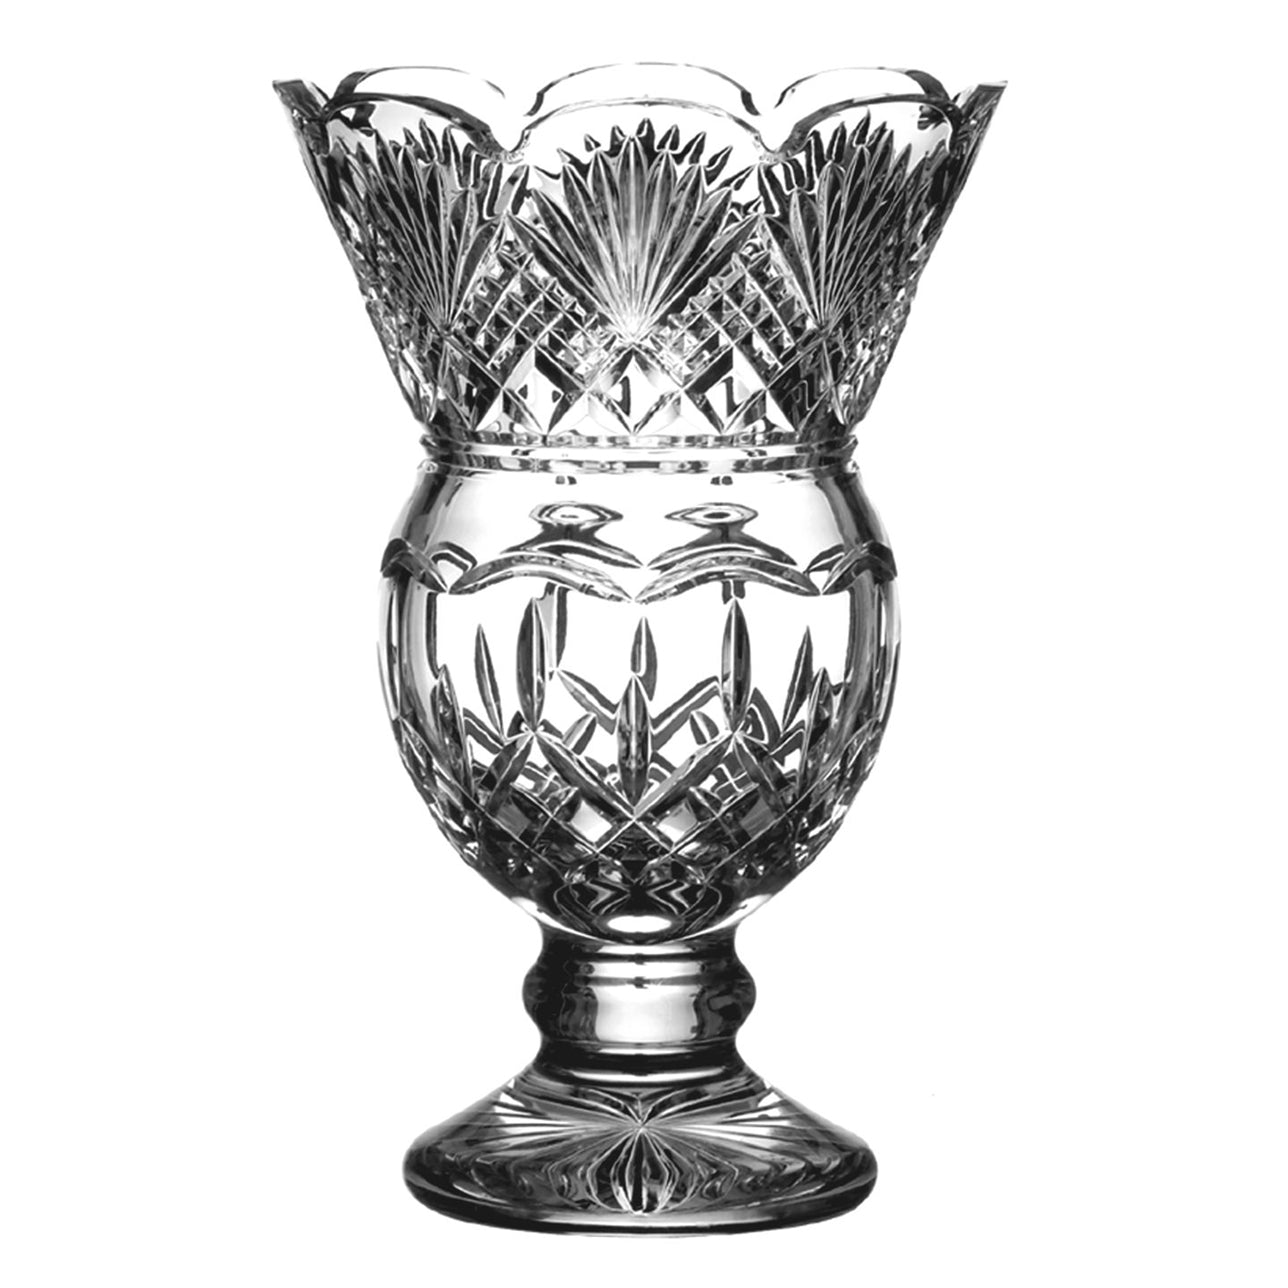 Waterford Crystal Lismore 32.5cm Thistle Vase  The Waterford Lismore pattern is a stunning combination of brilliance and clarity. You can't improve on nature, but you can come close with the Lismore 32.5cm Thistle Vase.